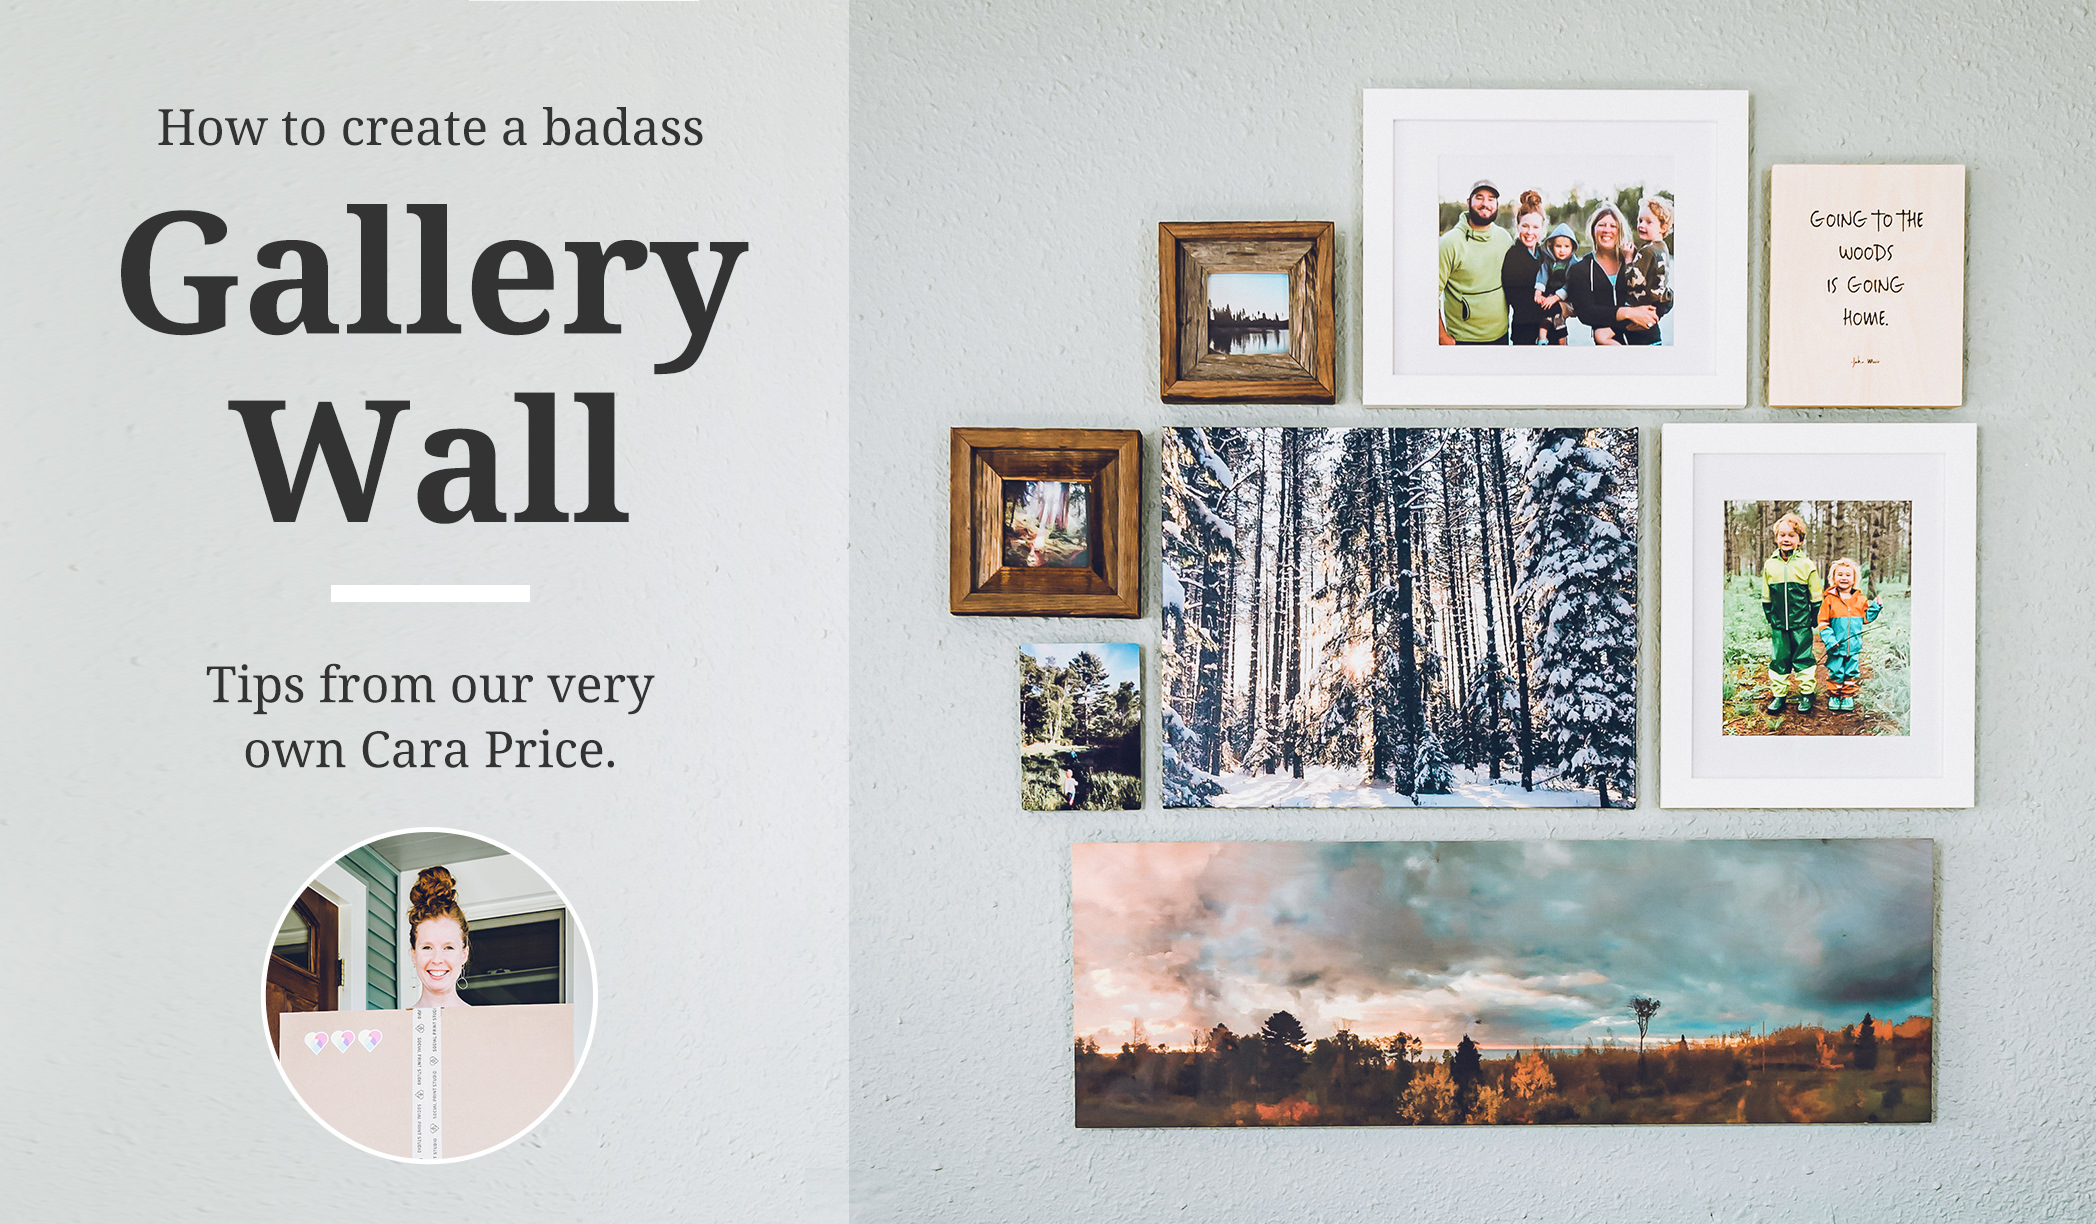 Gallery Wall Tips by our very own Cara Price.